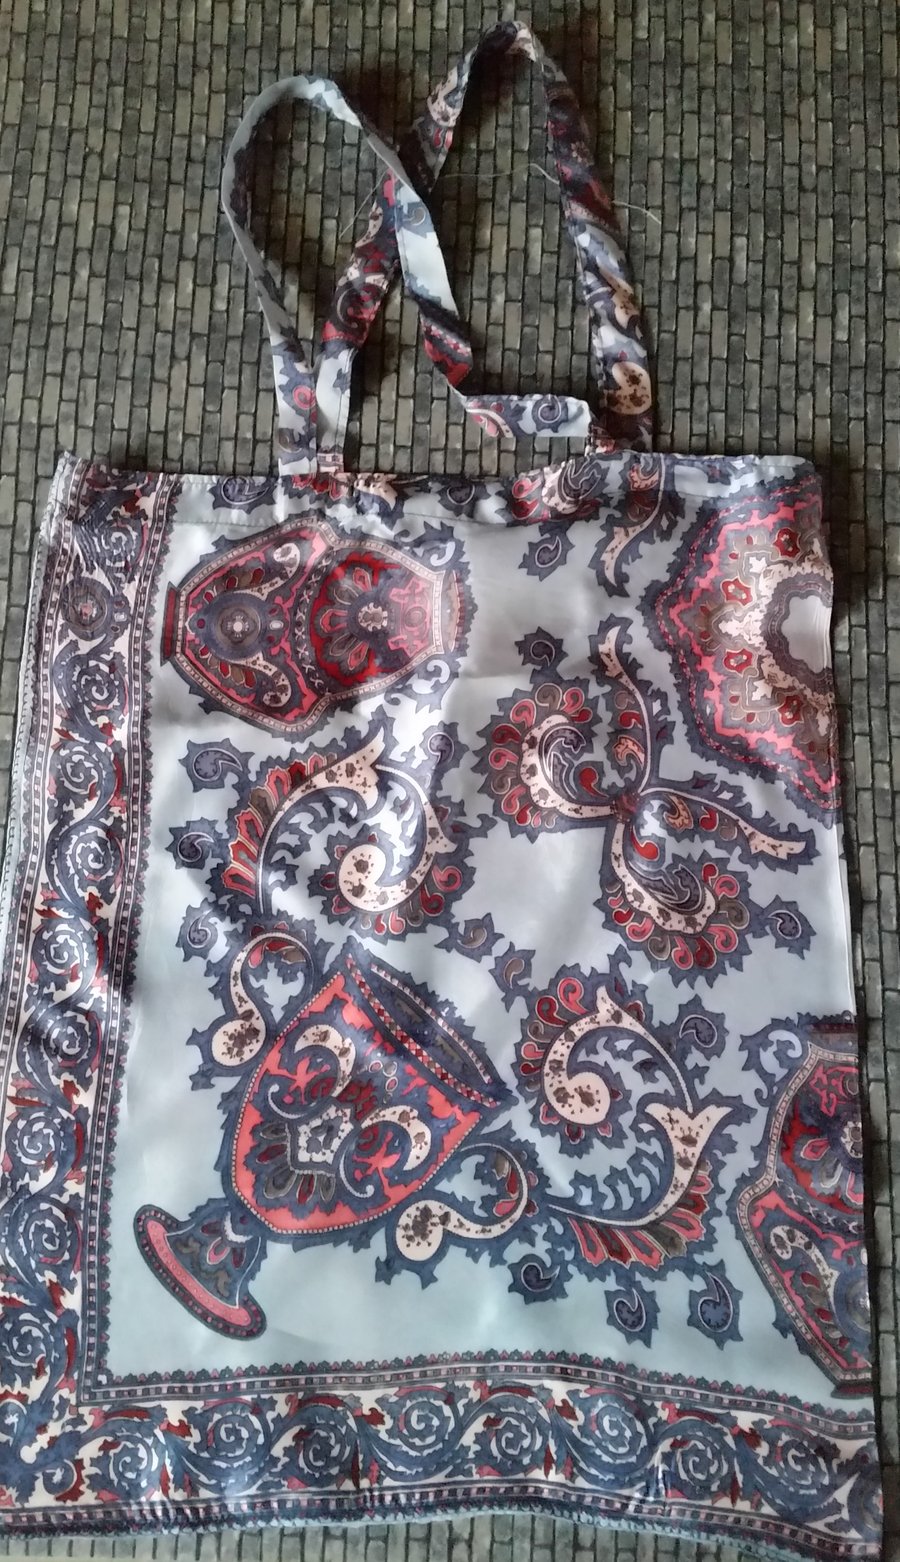 Vintage head scarf - Shopping or Tote Bag - Paisley Style Design